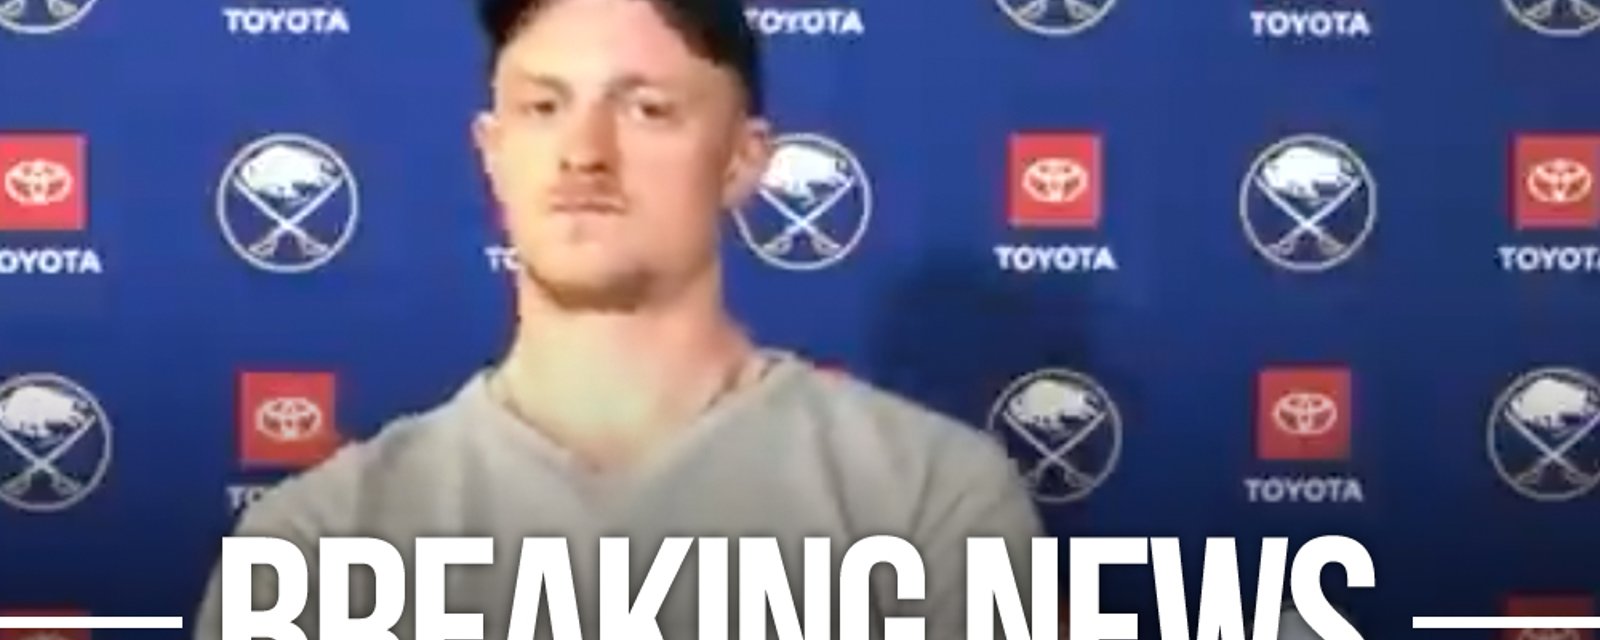 Eichel makes a number of comments that point to an offseason trade out of Buffalo